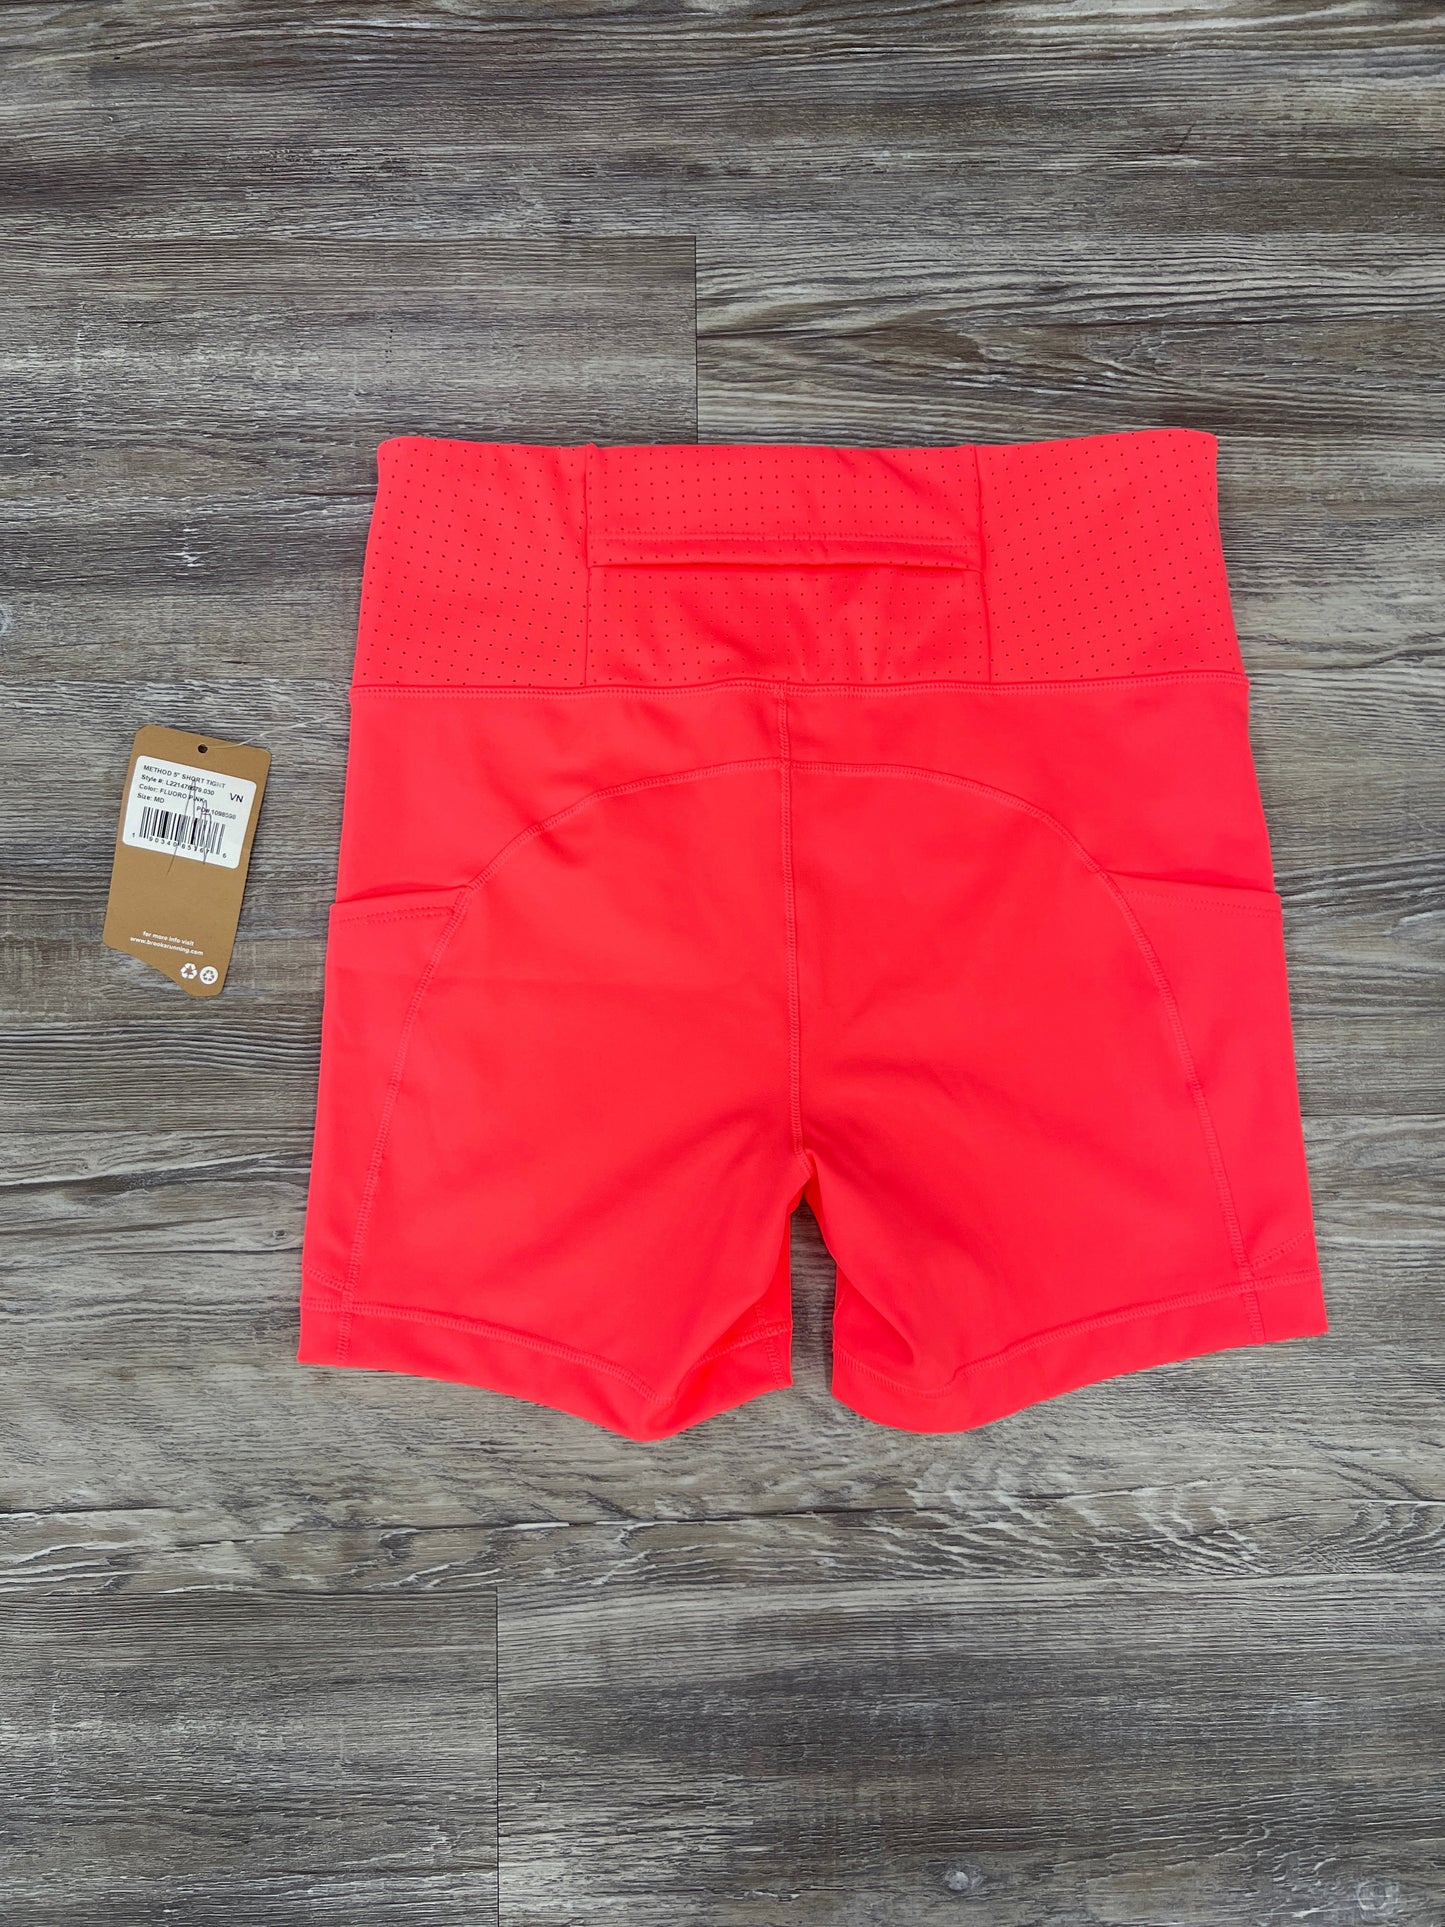 Athletic Shorts By Brooks Size: M